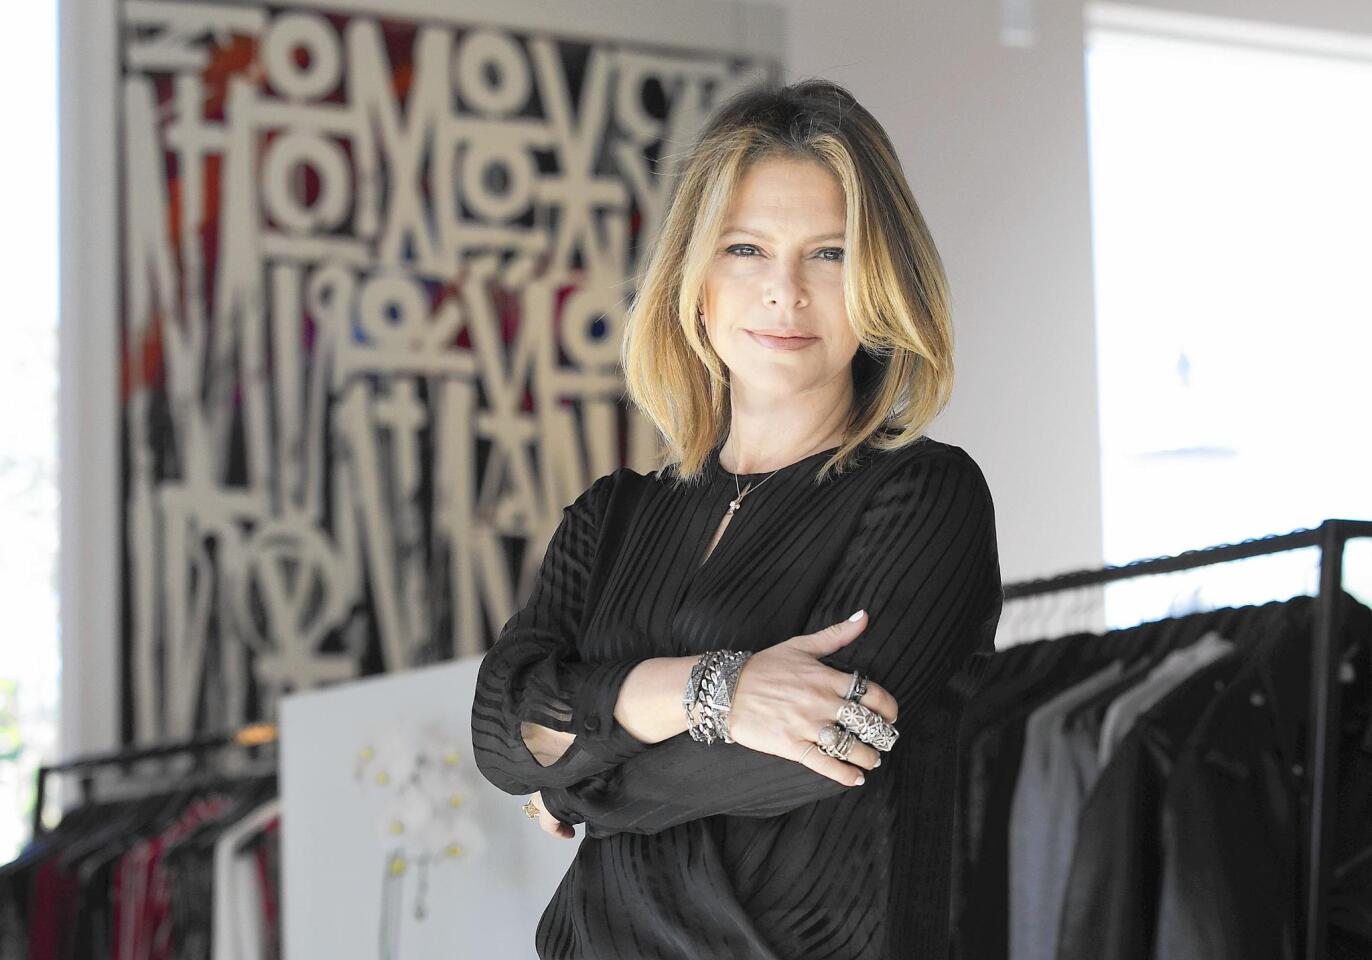 Fashion designer Elyse Walker opened her latest women's clothing store in Lido Marina Village which carries luxe apparel and accessories from fashion-forward designers.